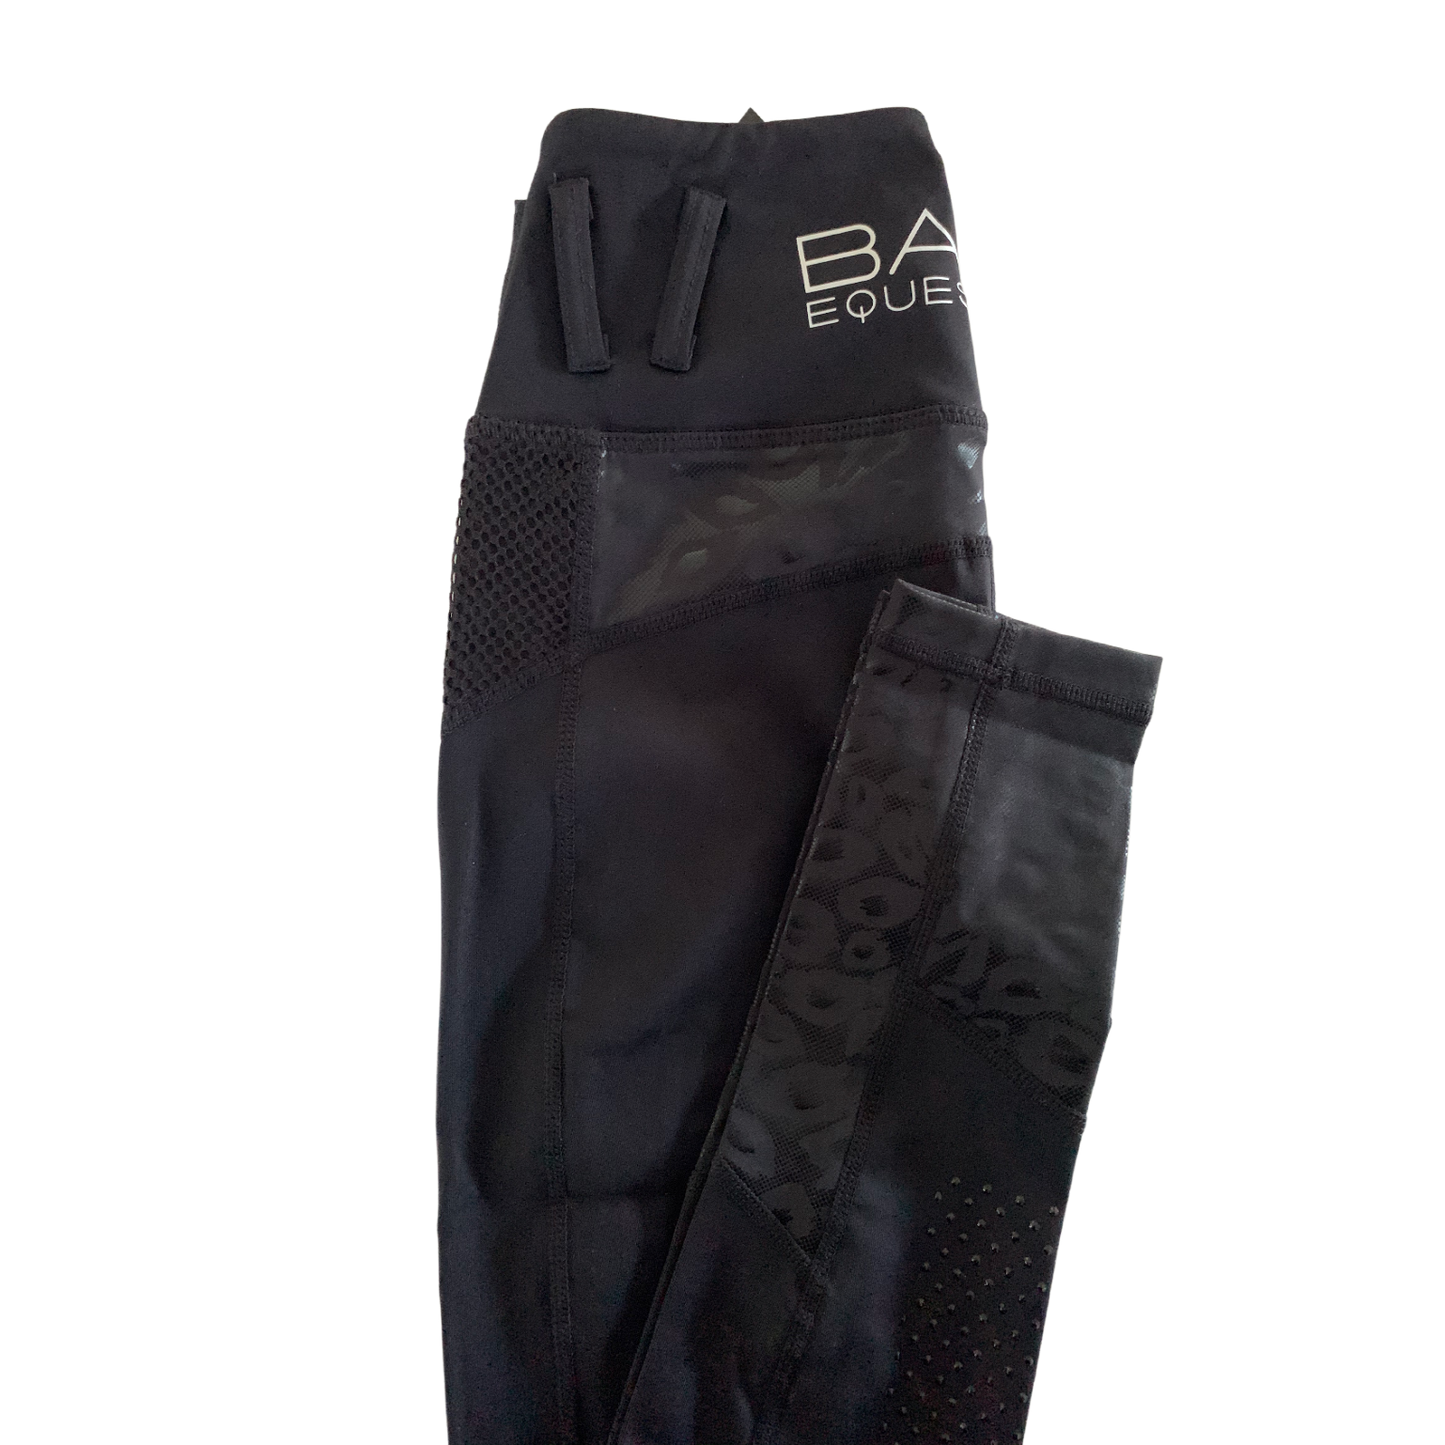 Black horse riding tights with logo, mesh, and grip detailing.